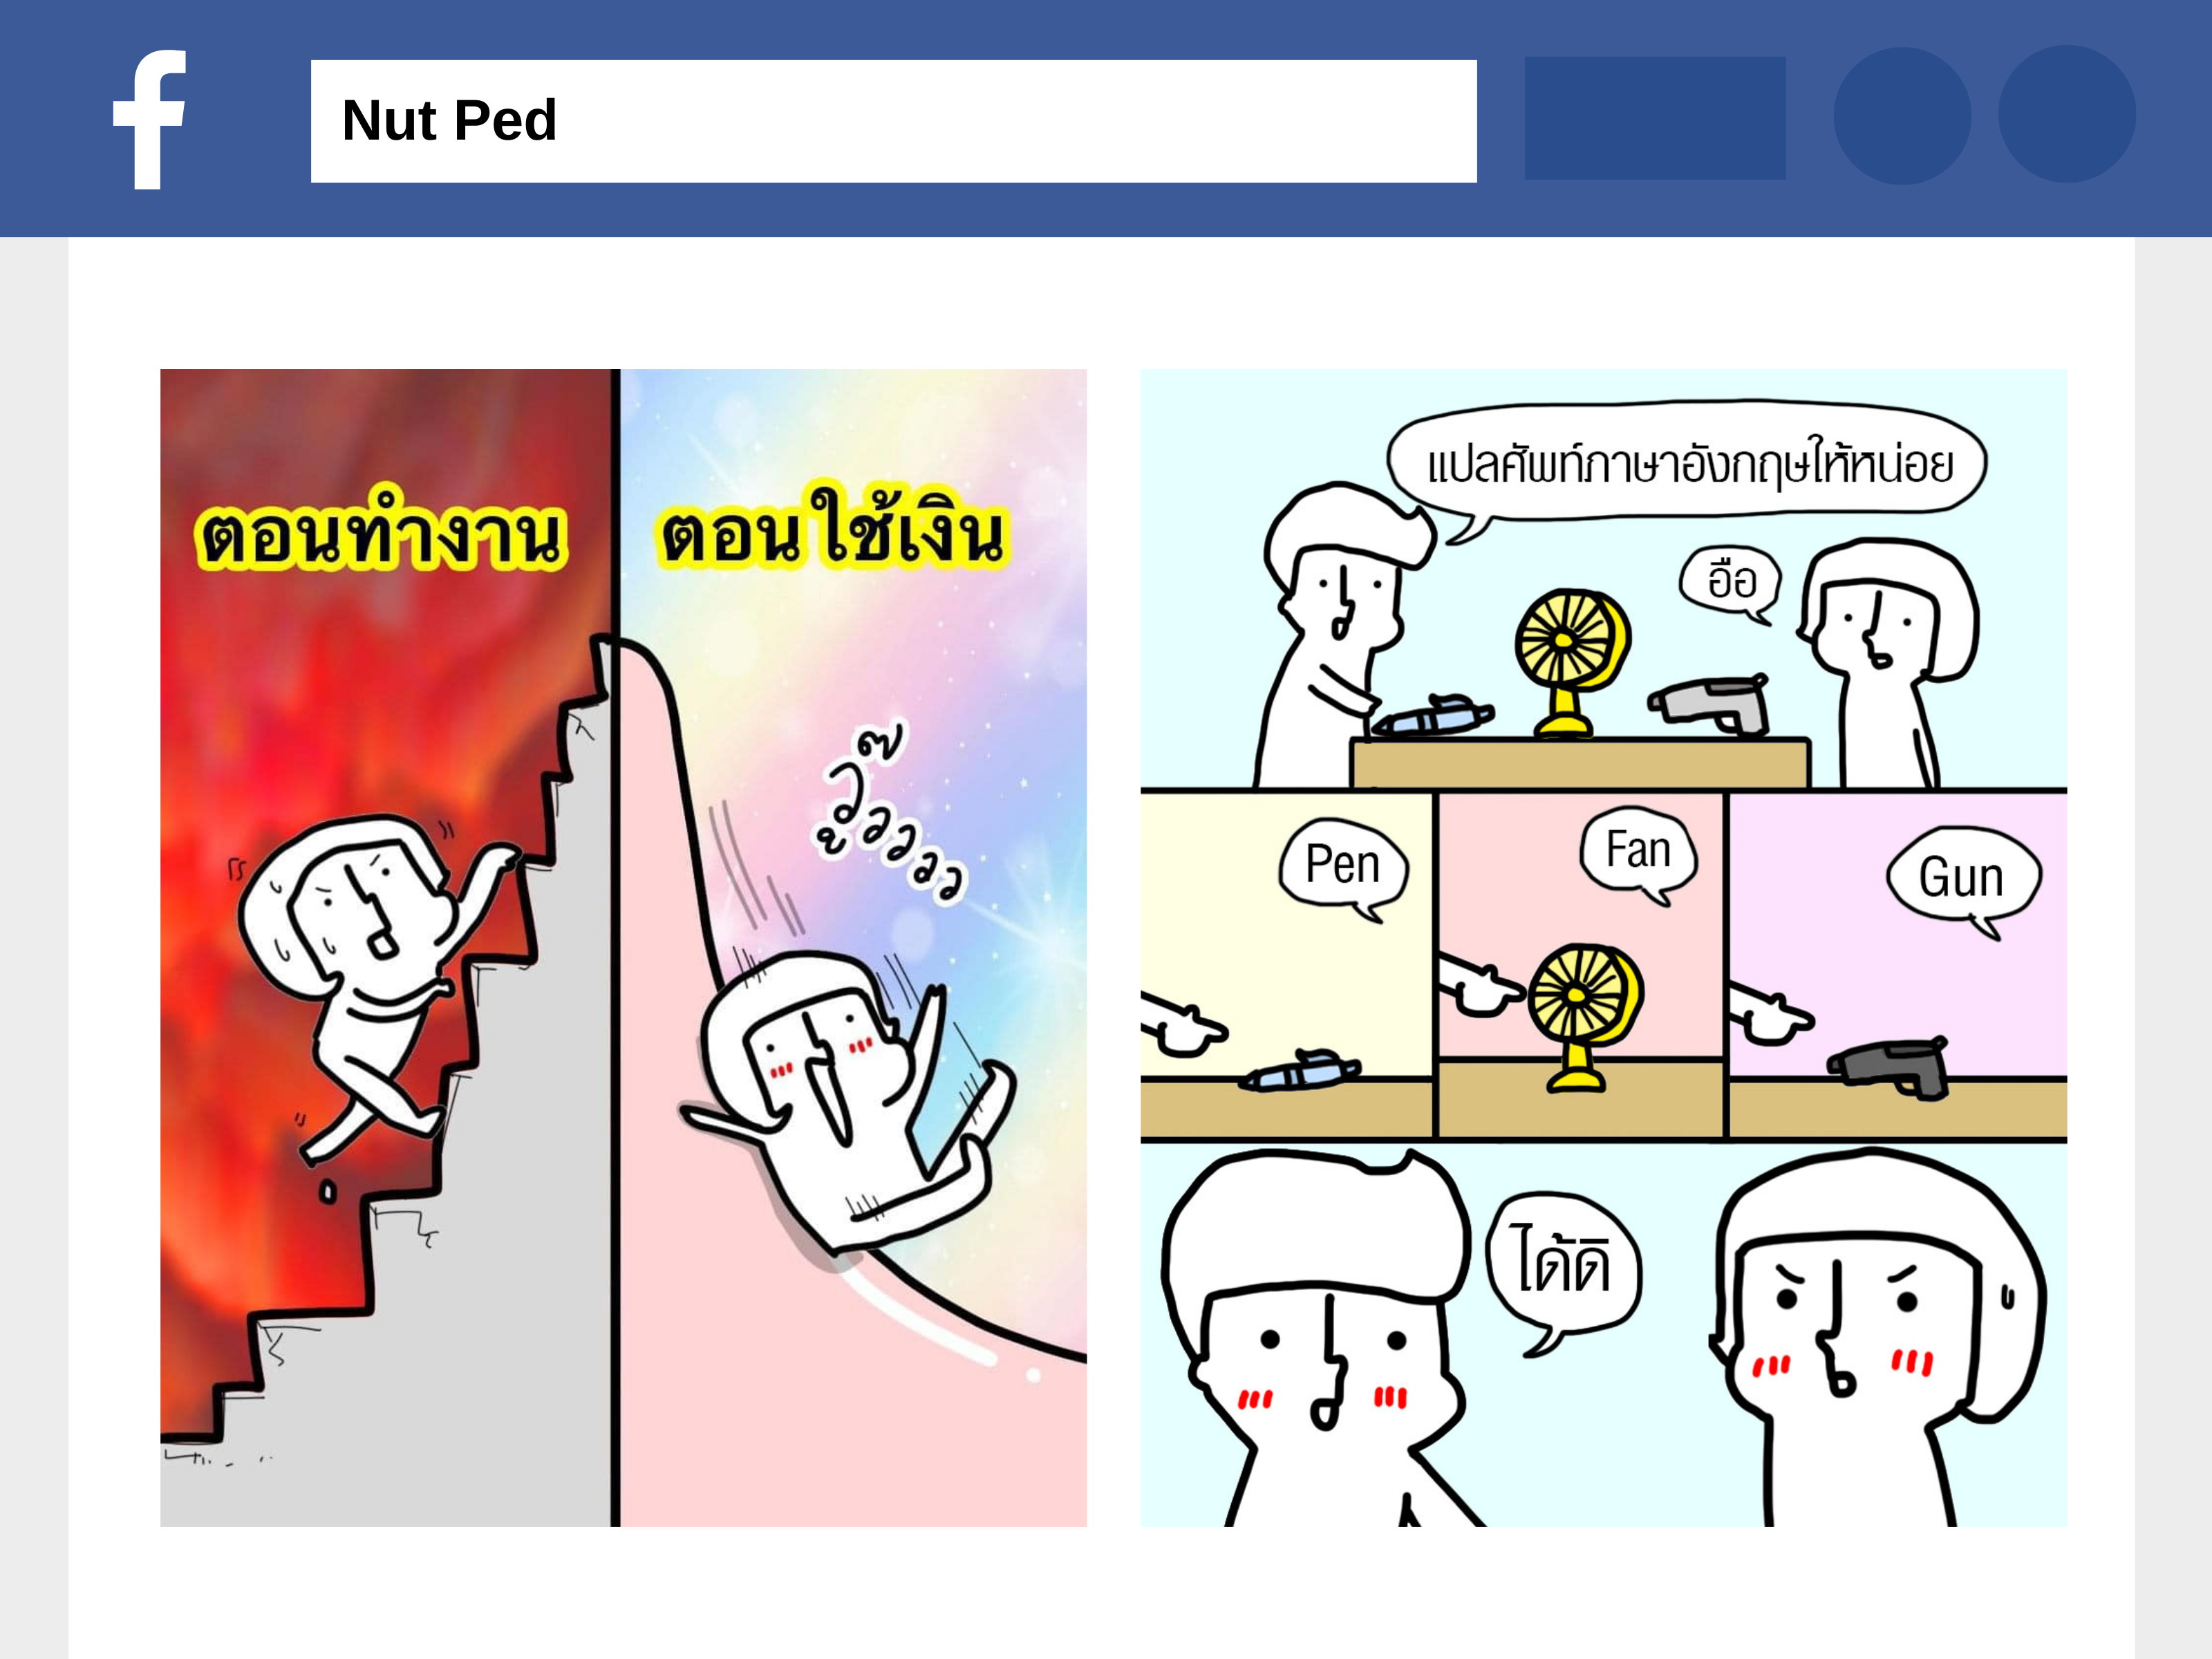 Humor in Nut Ped Facebook Fanpage: Linguistic Strategies  and the Function of Humor